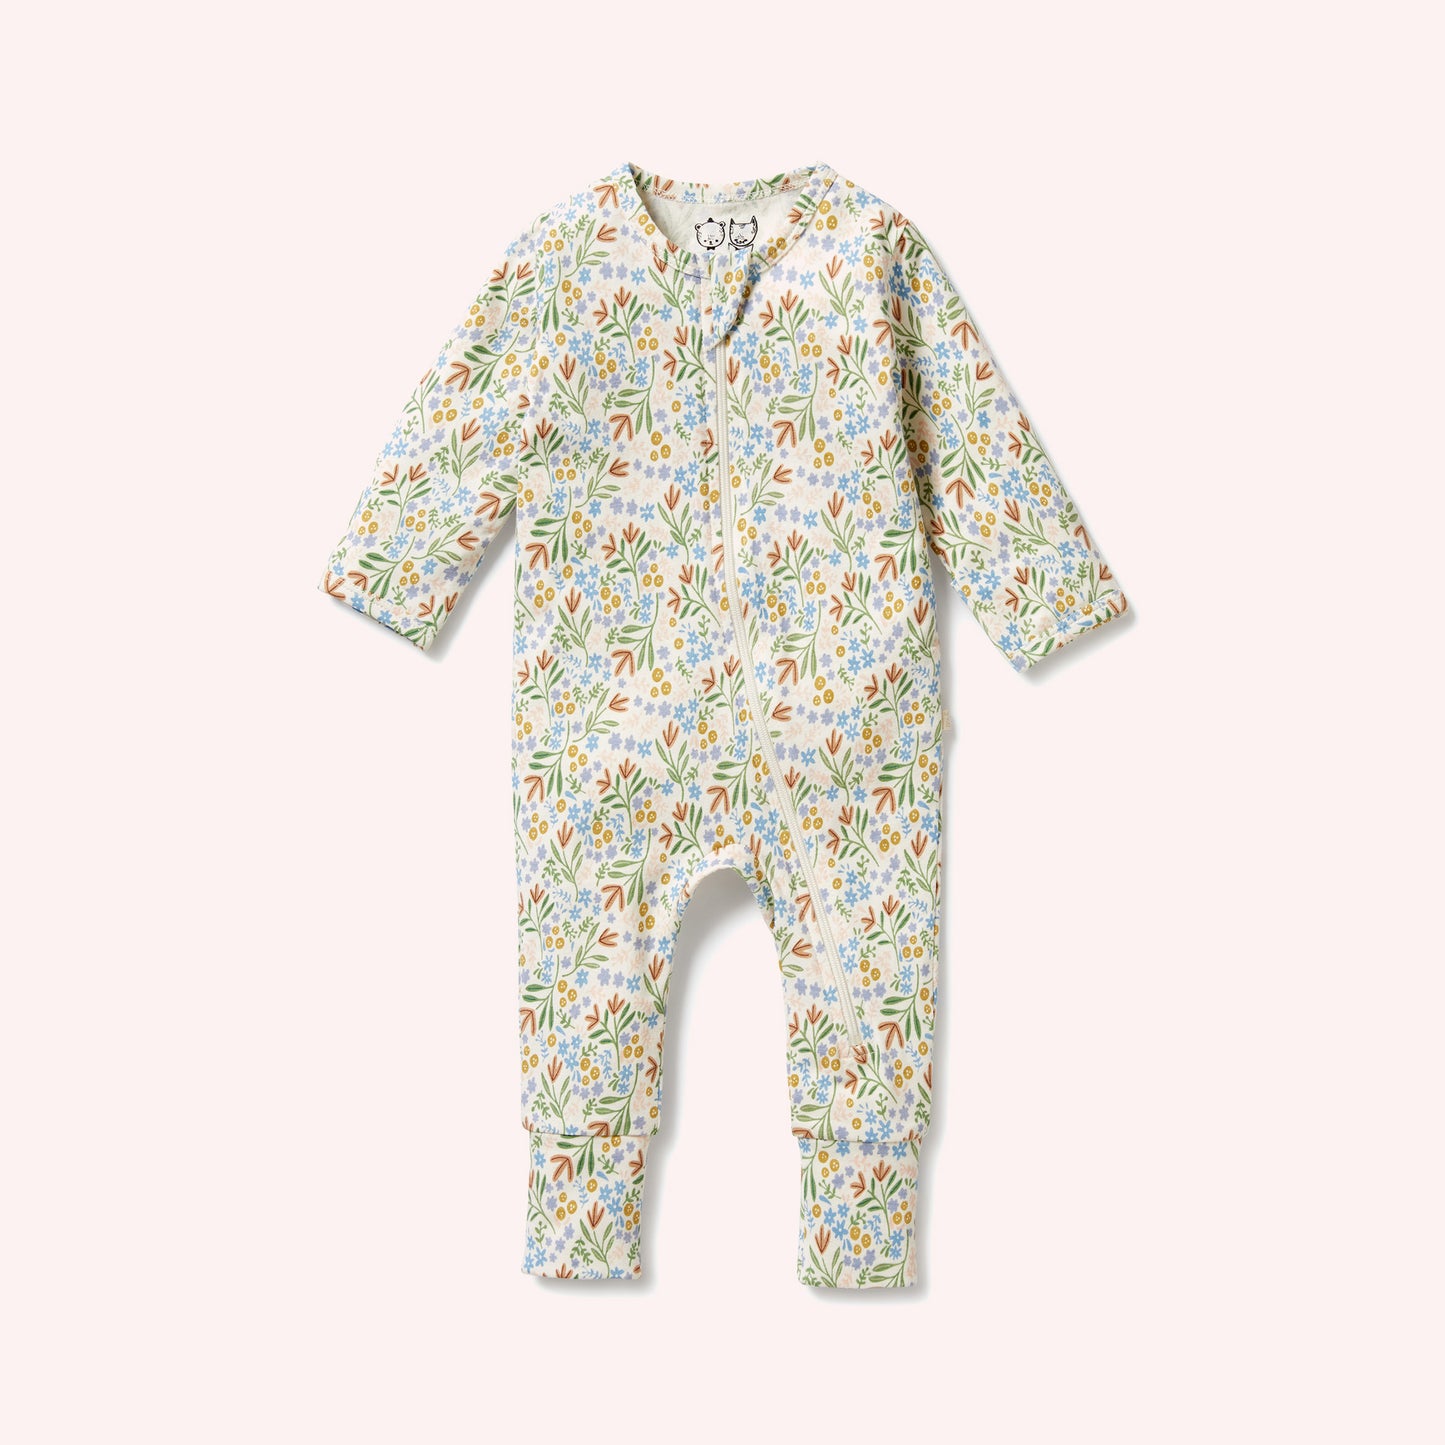 Organic Zipsuit with Feet - Tinker Floral